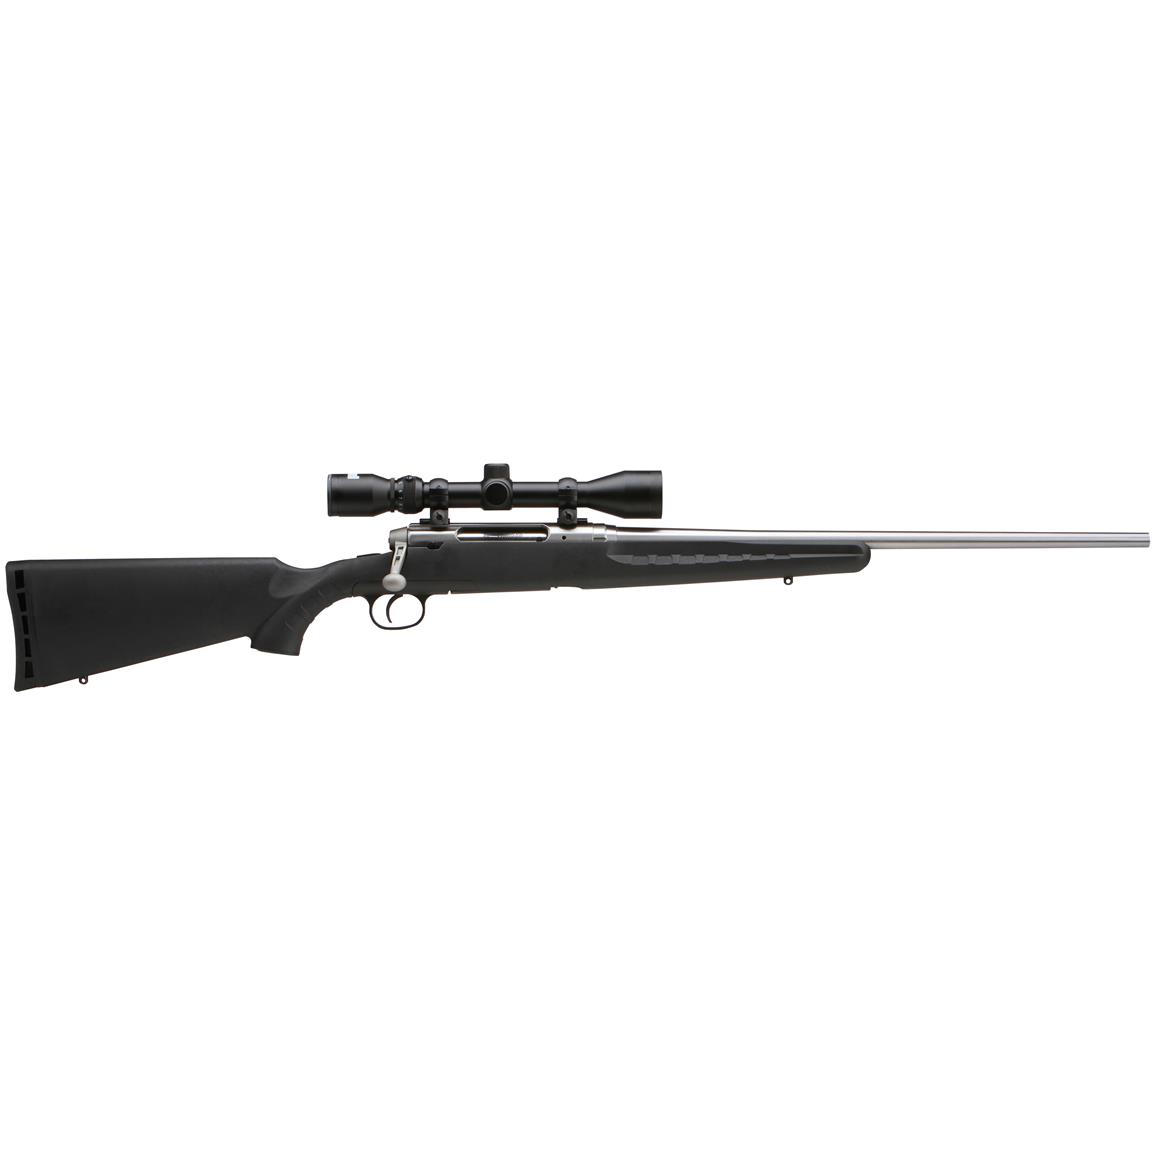 Savage Axis Stainless XP, Bolt Action, .243 Winchester, 22" Barrel, 3-9x40mm Scope, 4 1 Rounds